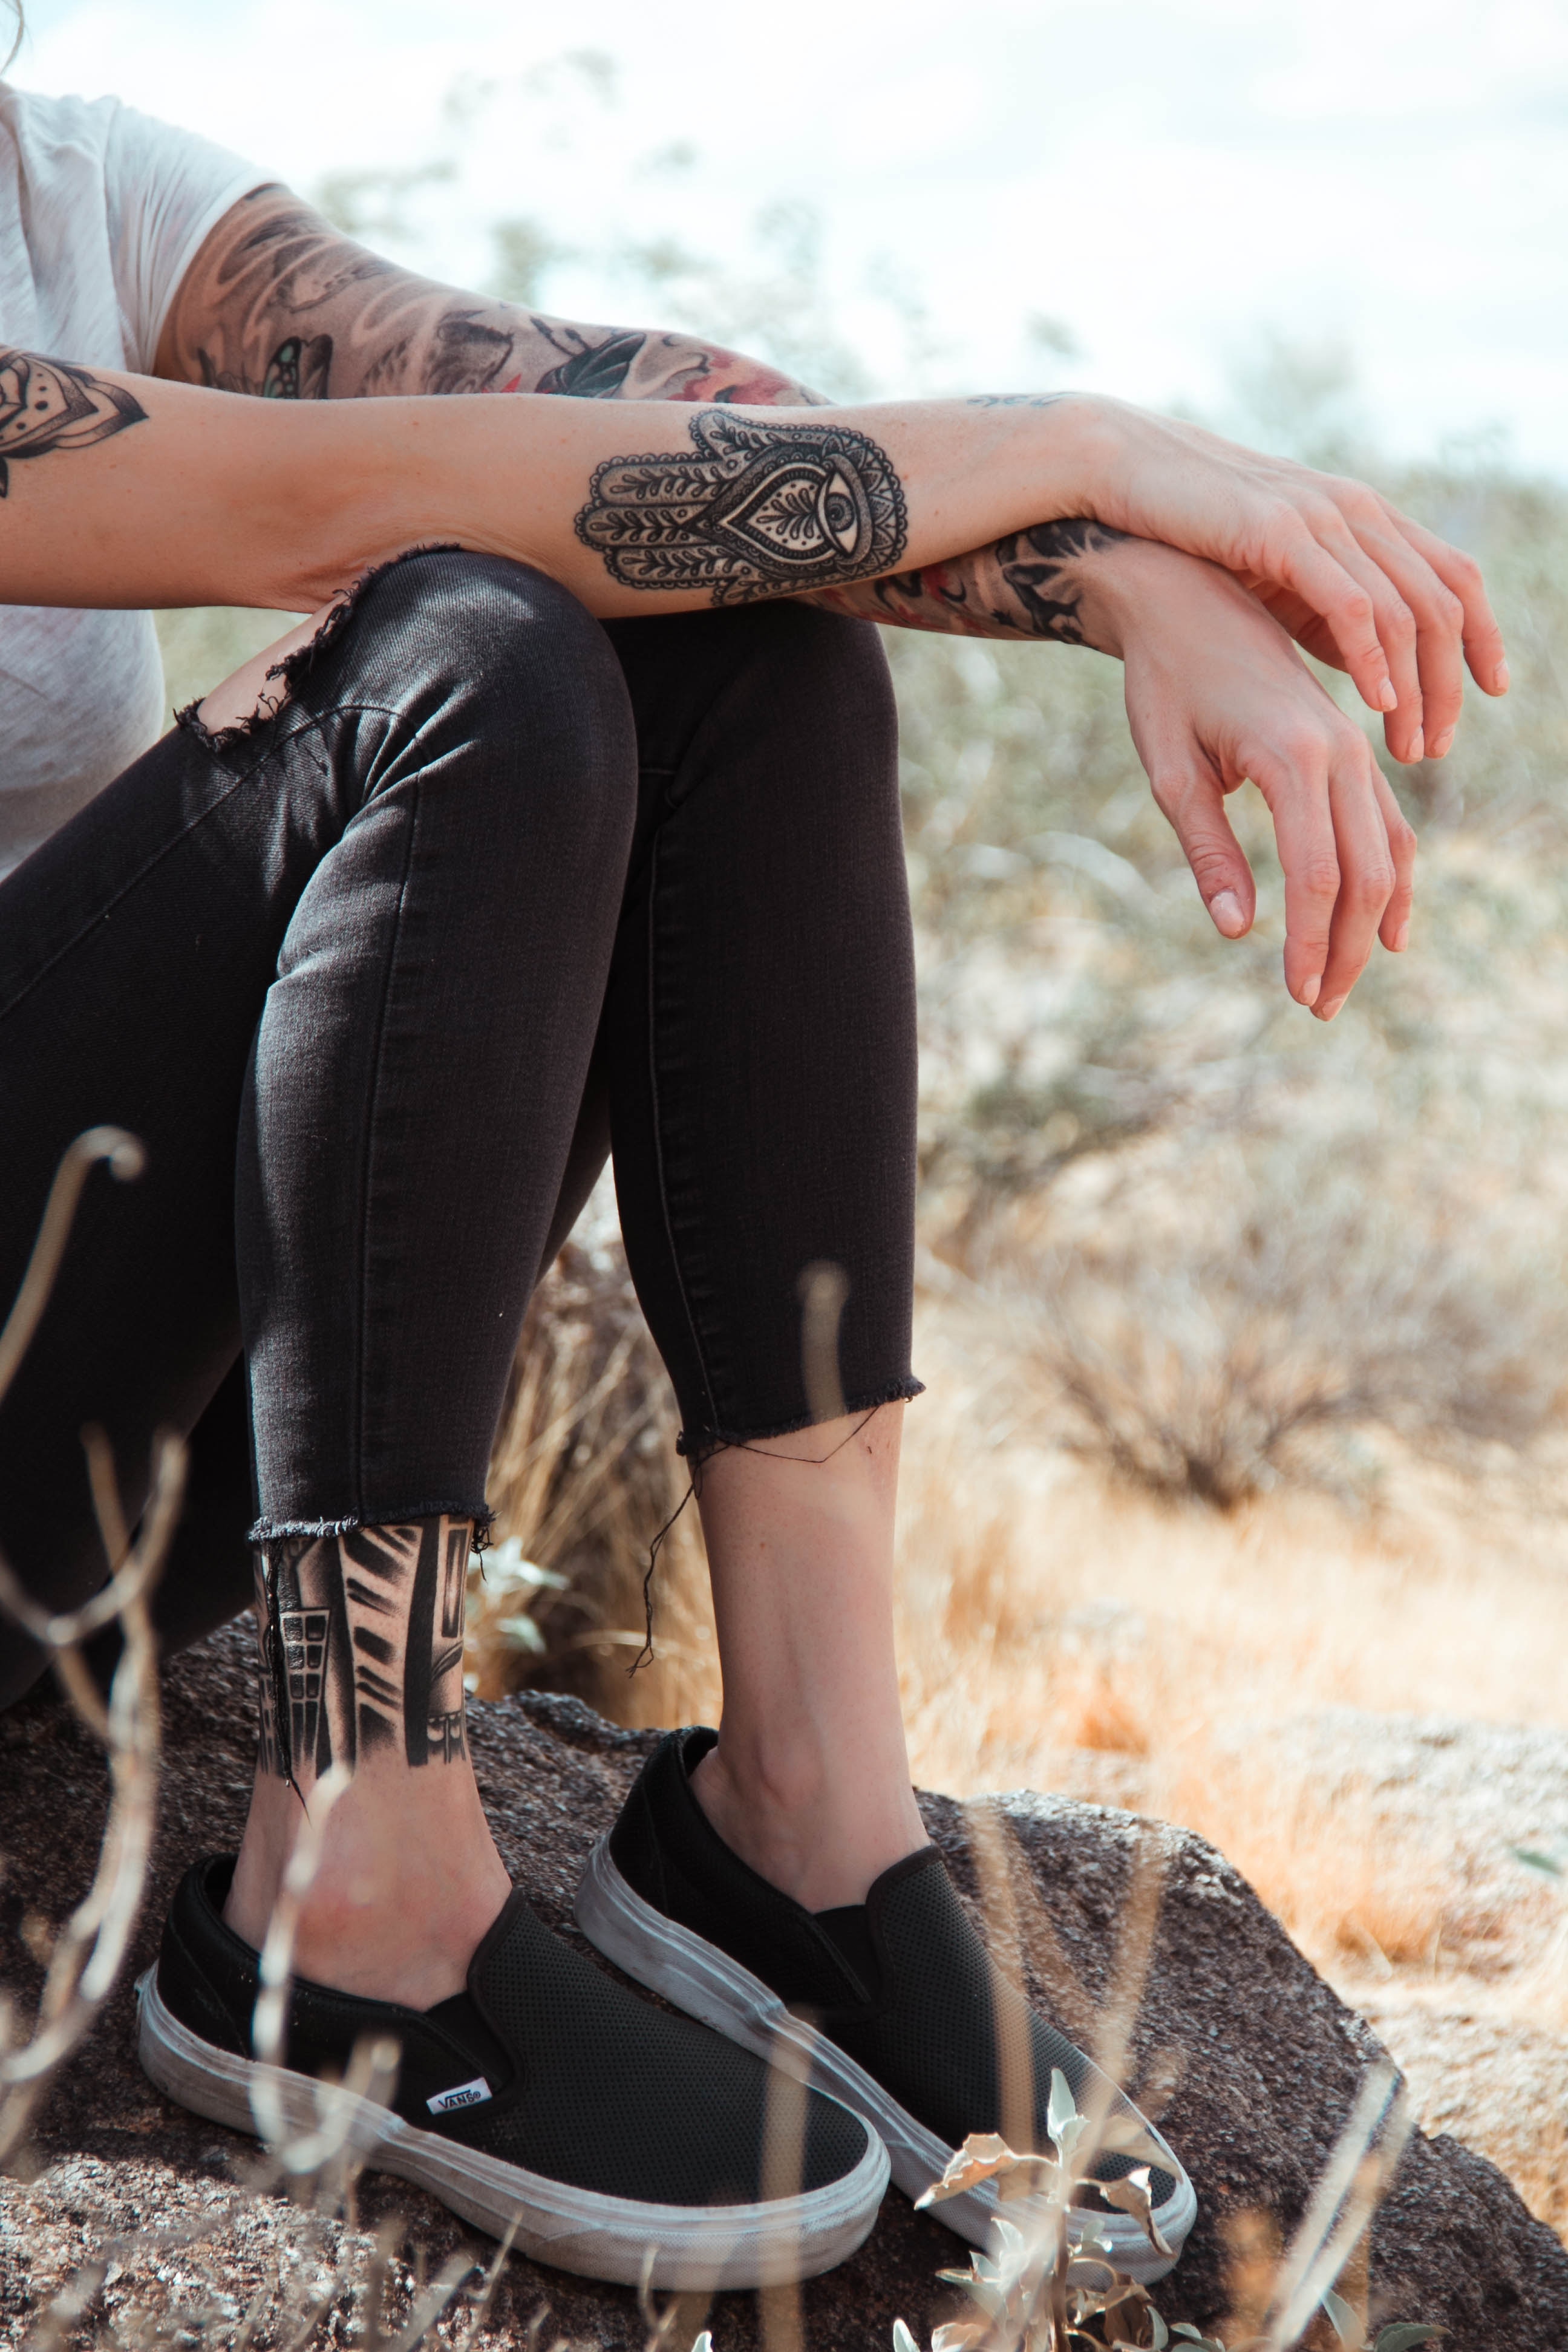 hands, tattoos, tattoo, miscellanea, miscellaneous, legs, style, clothing